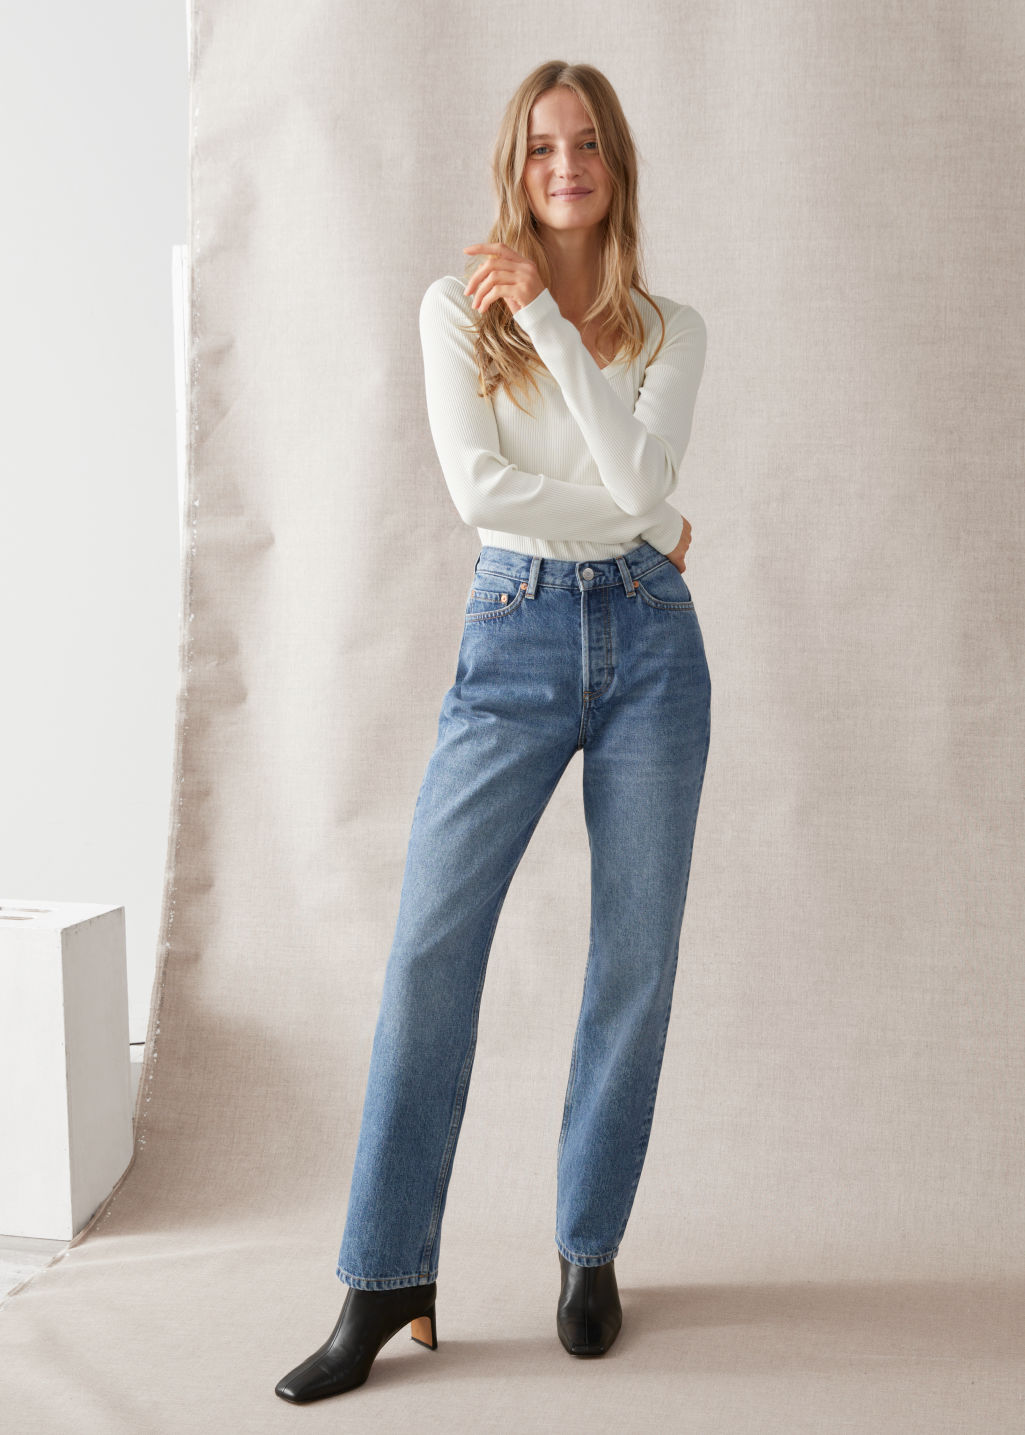 Keeper Cut Jeans - Dusty Blue - Straight - & Other Stories - Click Image to Close